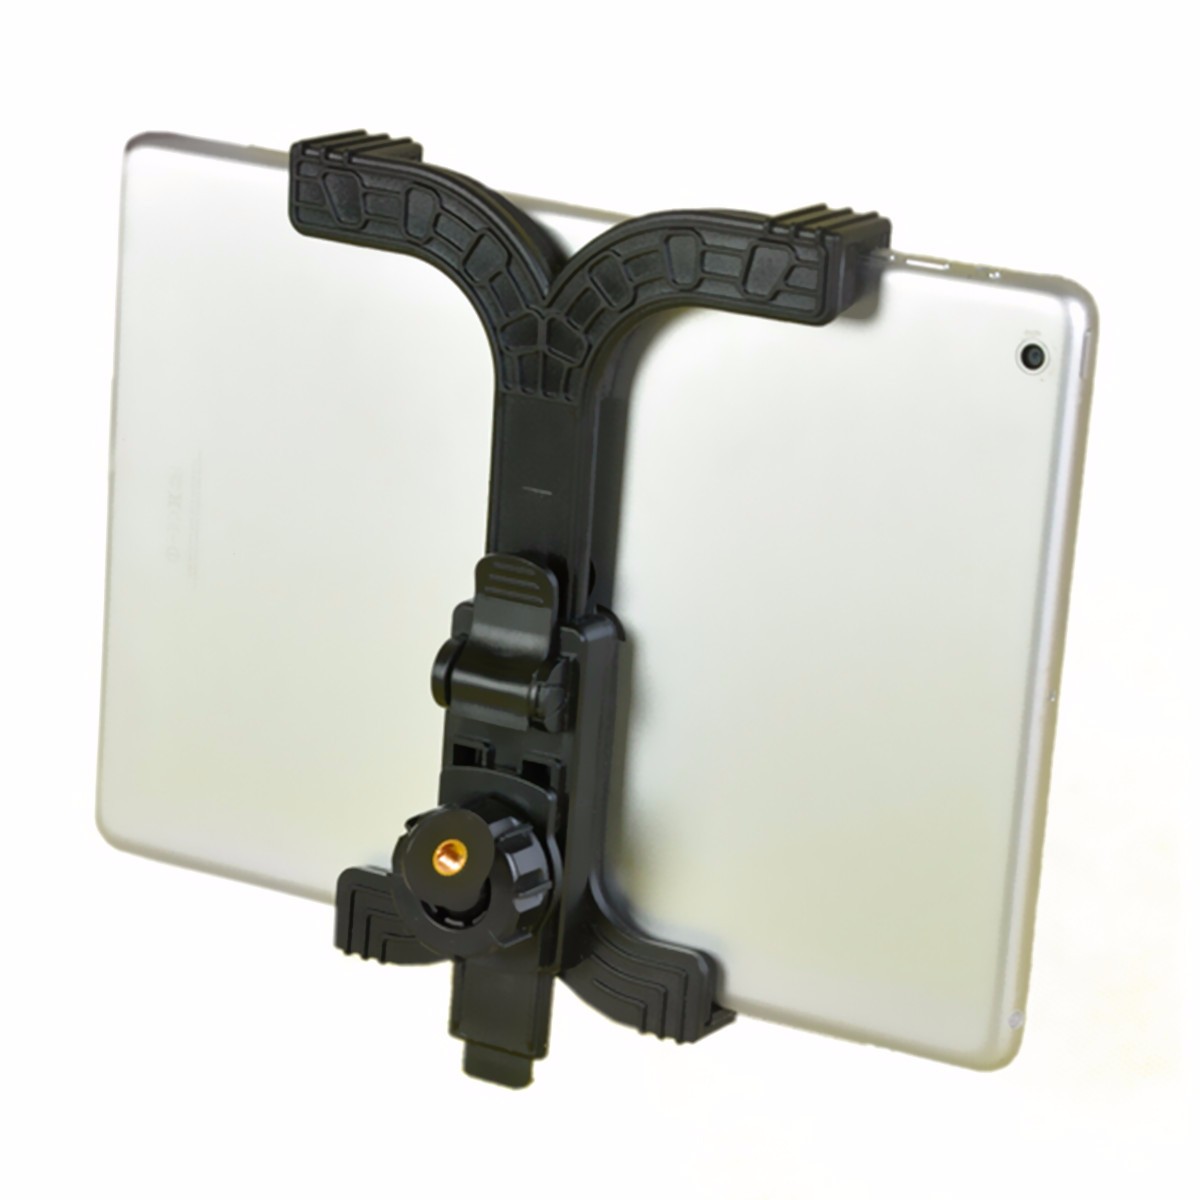 Self-Stick-Tripod-Stand-Holder-Tablet-Bracket-Accessories-For-7-To-11-Inch-for-iPad-for-iPod-Tablet-1047201-4